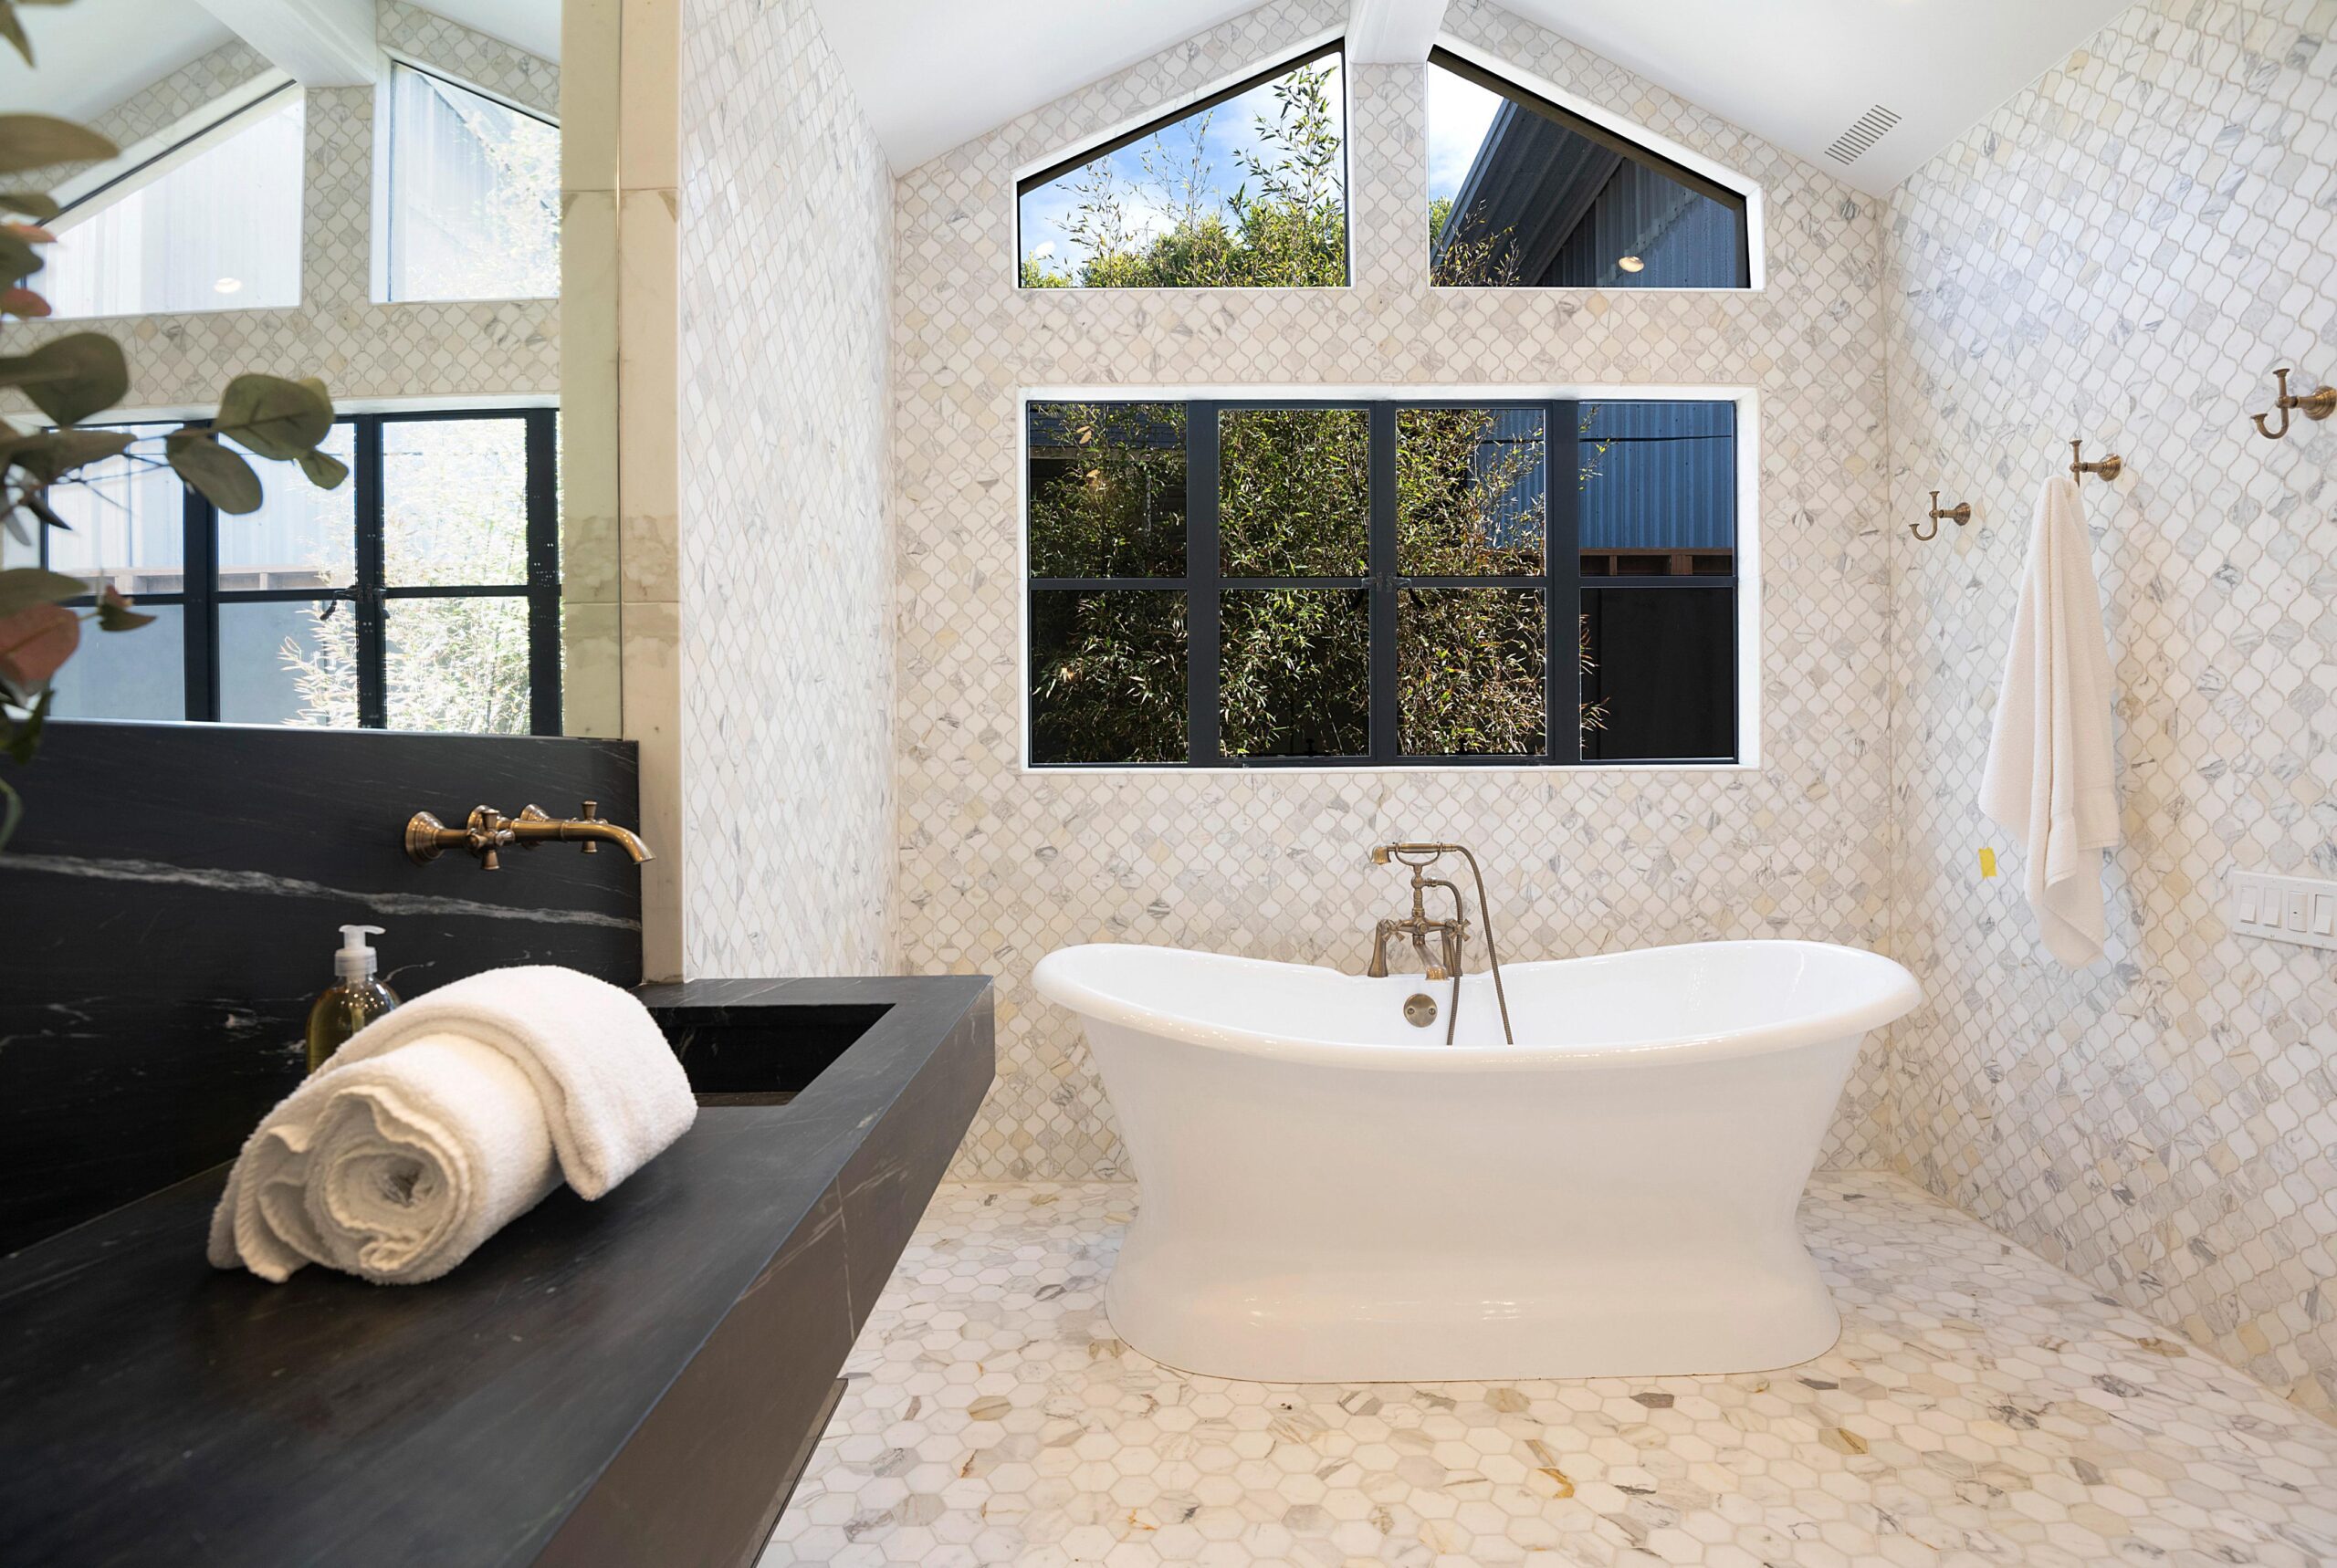 Luxurious stand alone tub featured in modern bathroom design